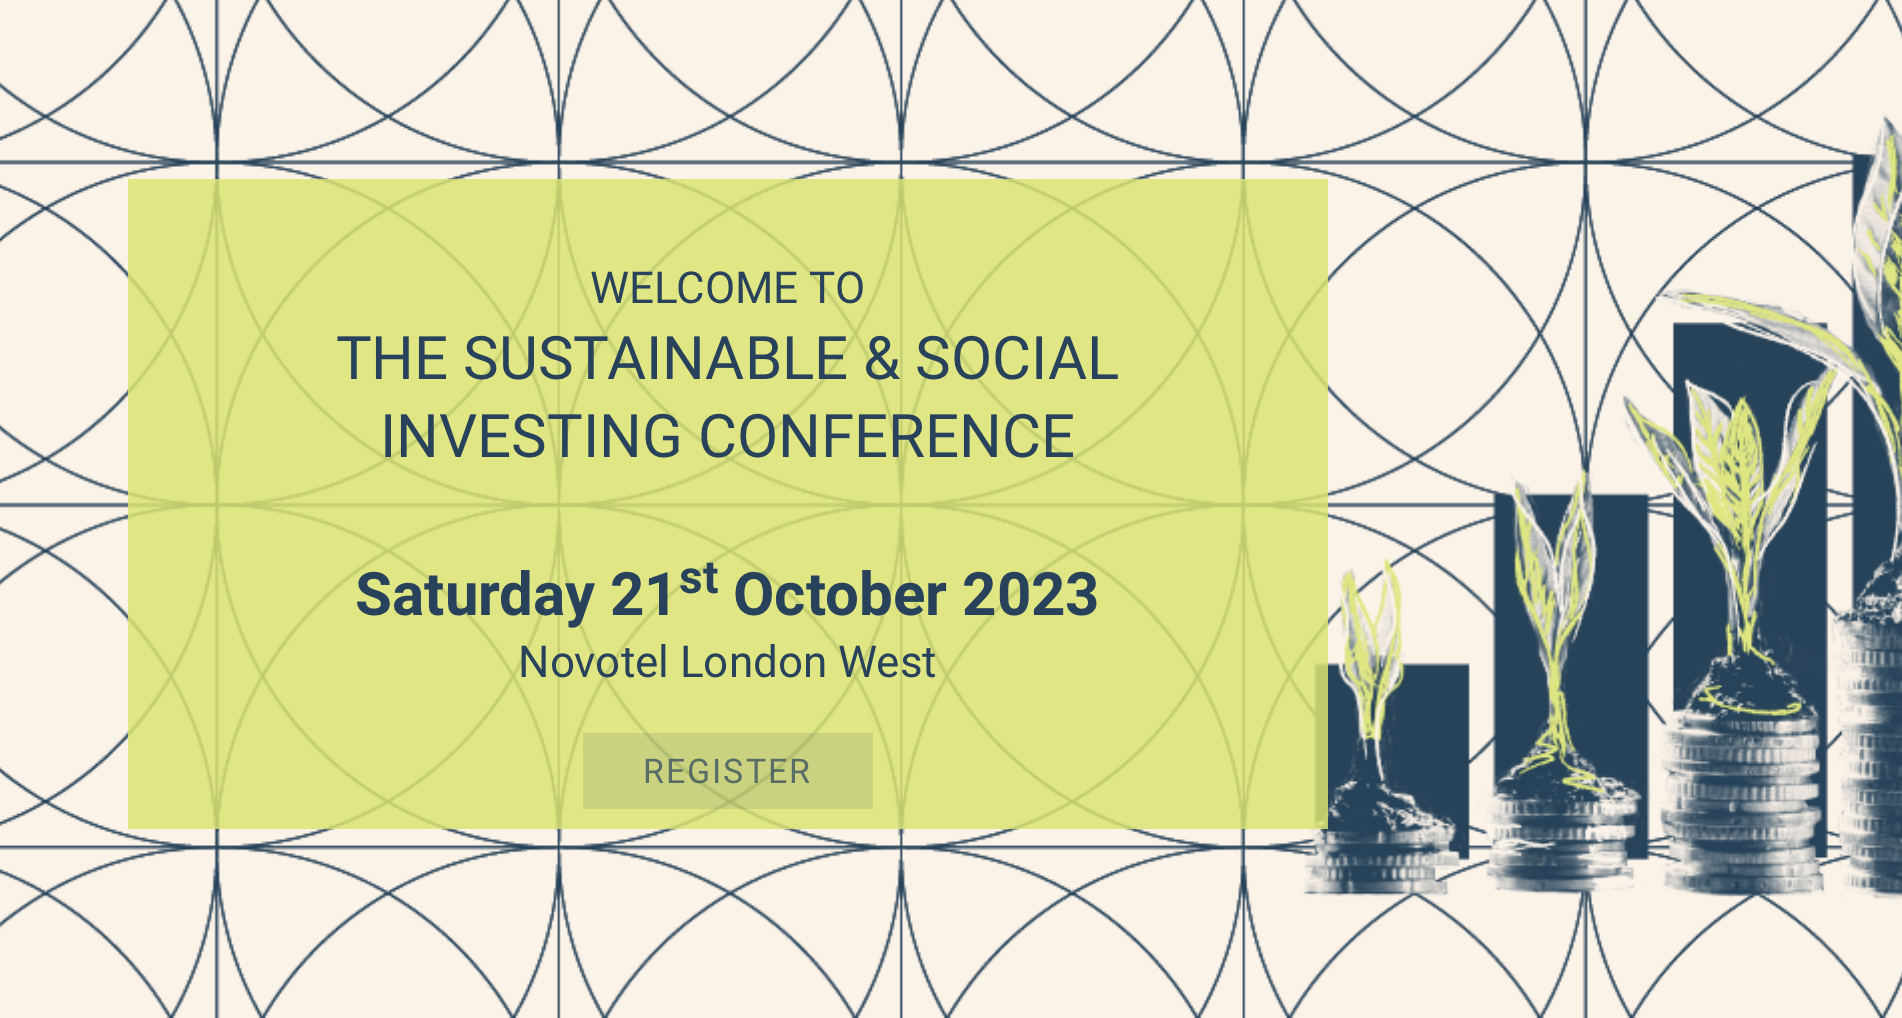 Image for OWL ESG's Sustainable and Social Investing Conference, featuring the company logo and event details.